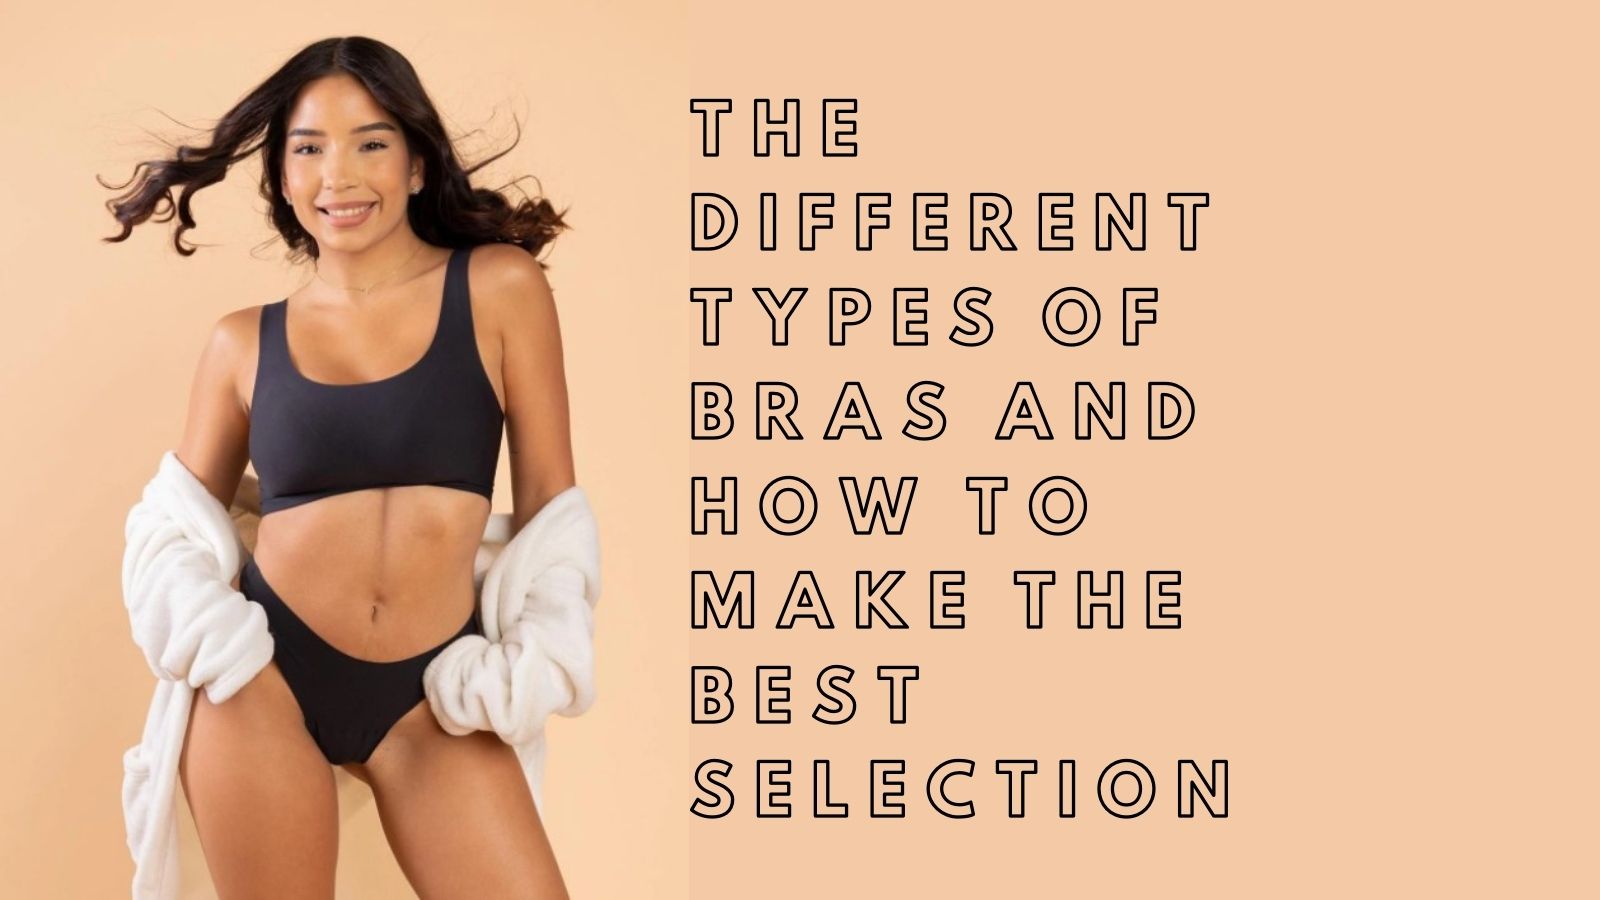 The Different Types of Bras and How to Make the Best Selection